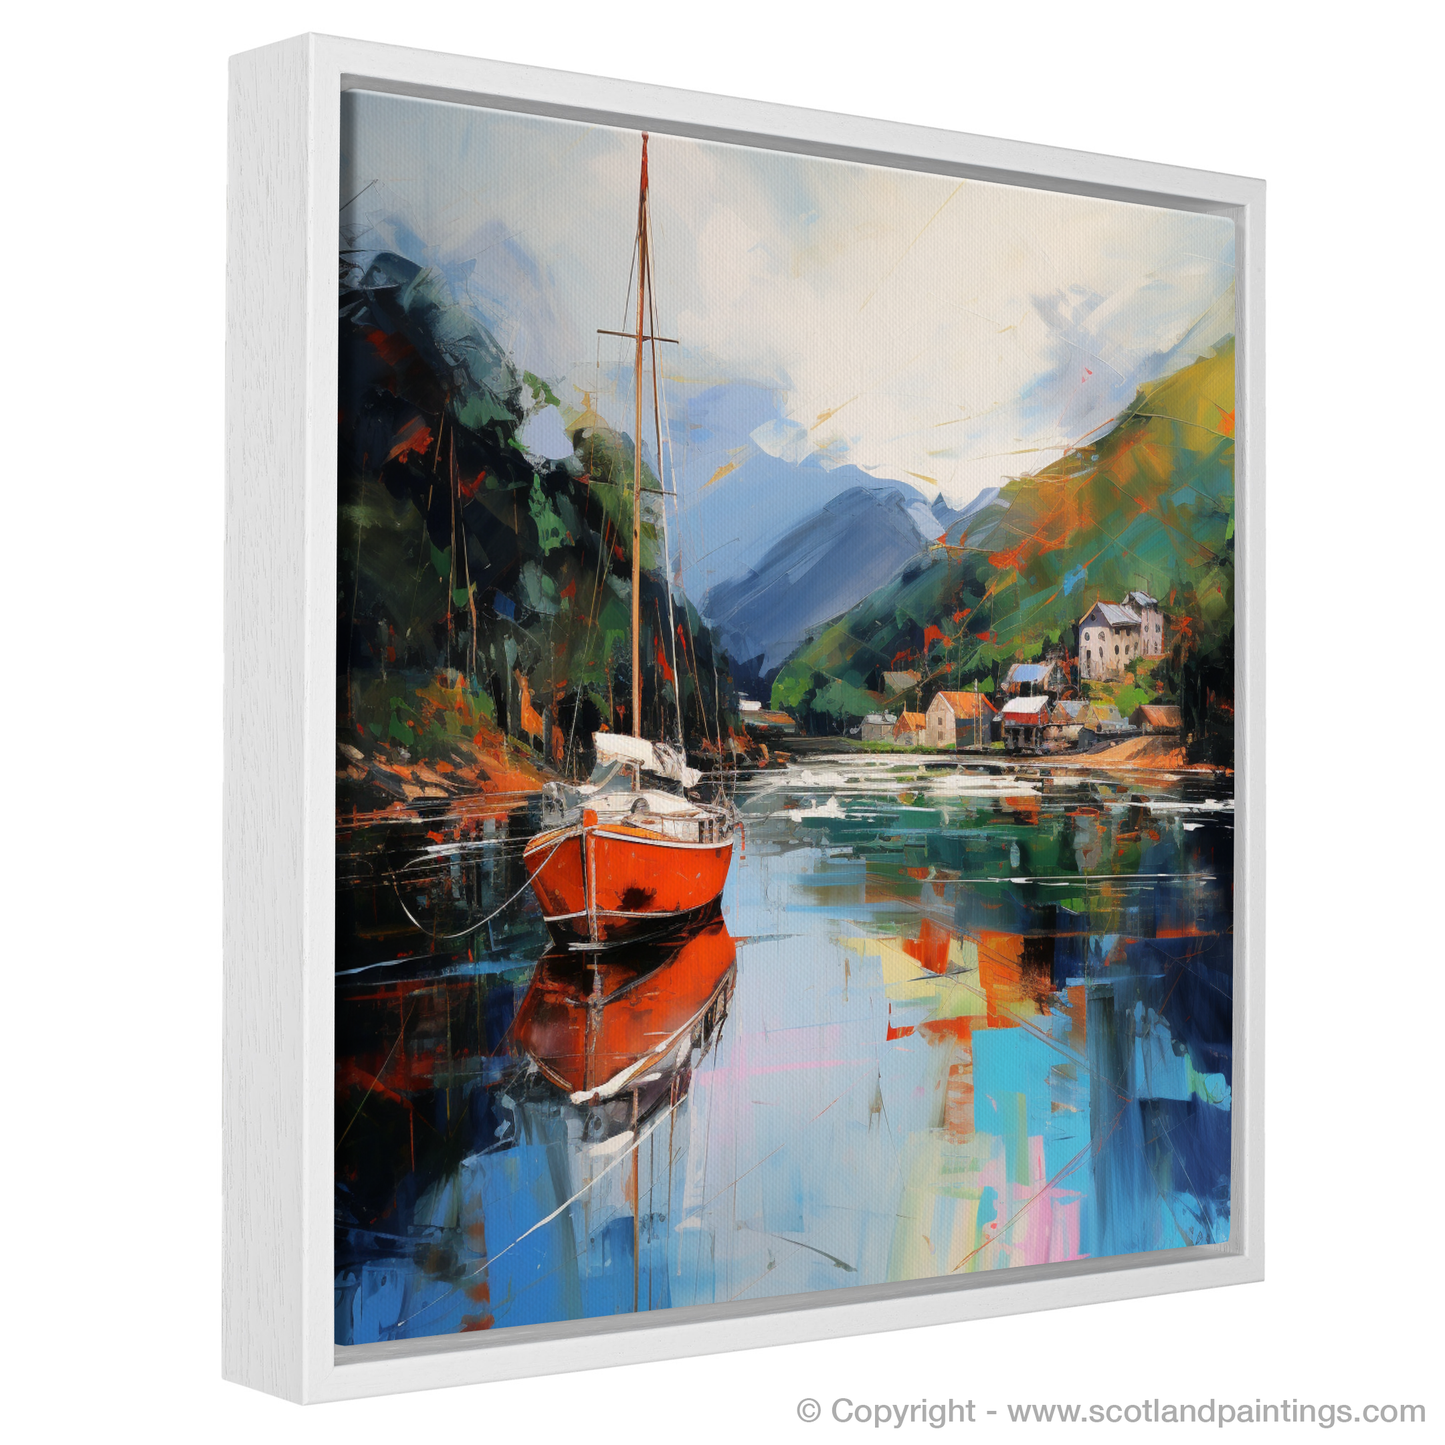 Painting and Art Print of Balmaha Harbour, Loch Lomond entitled "Vibrant Reflections at Balmaha Harbour".